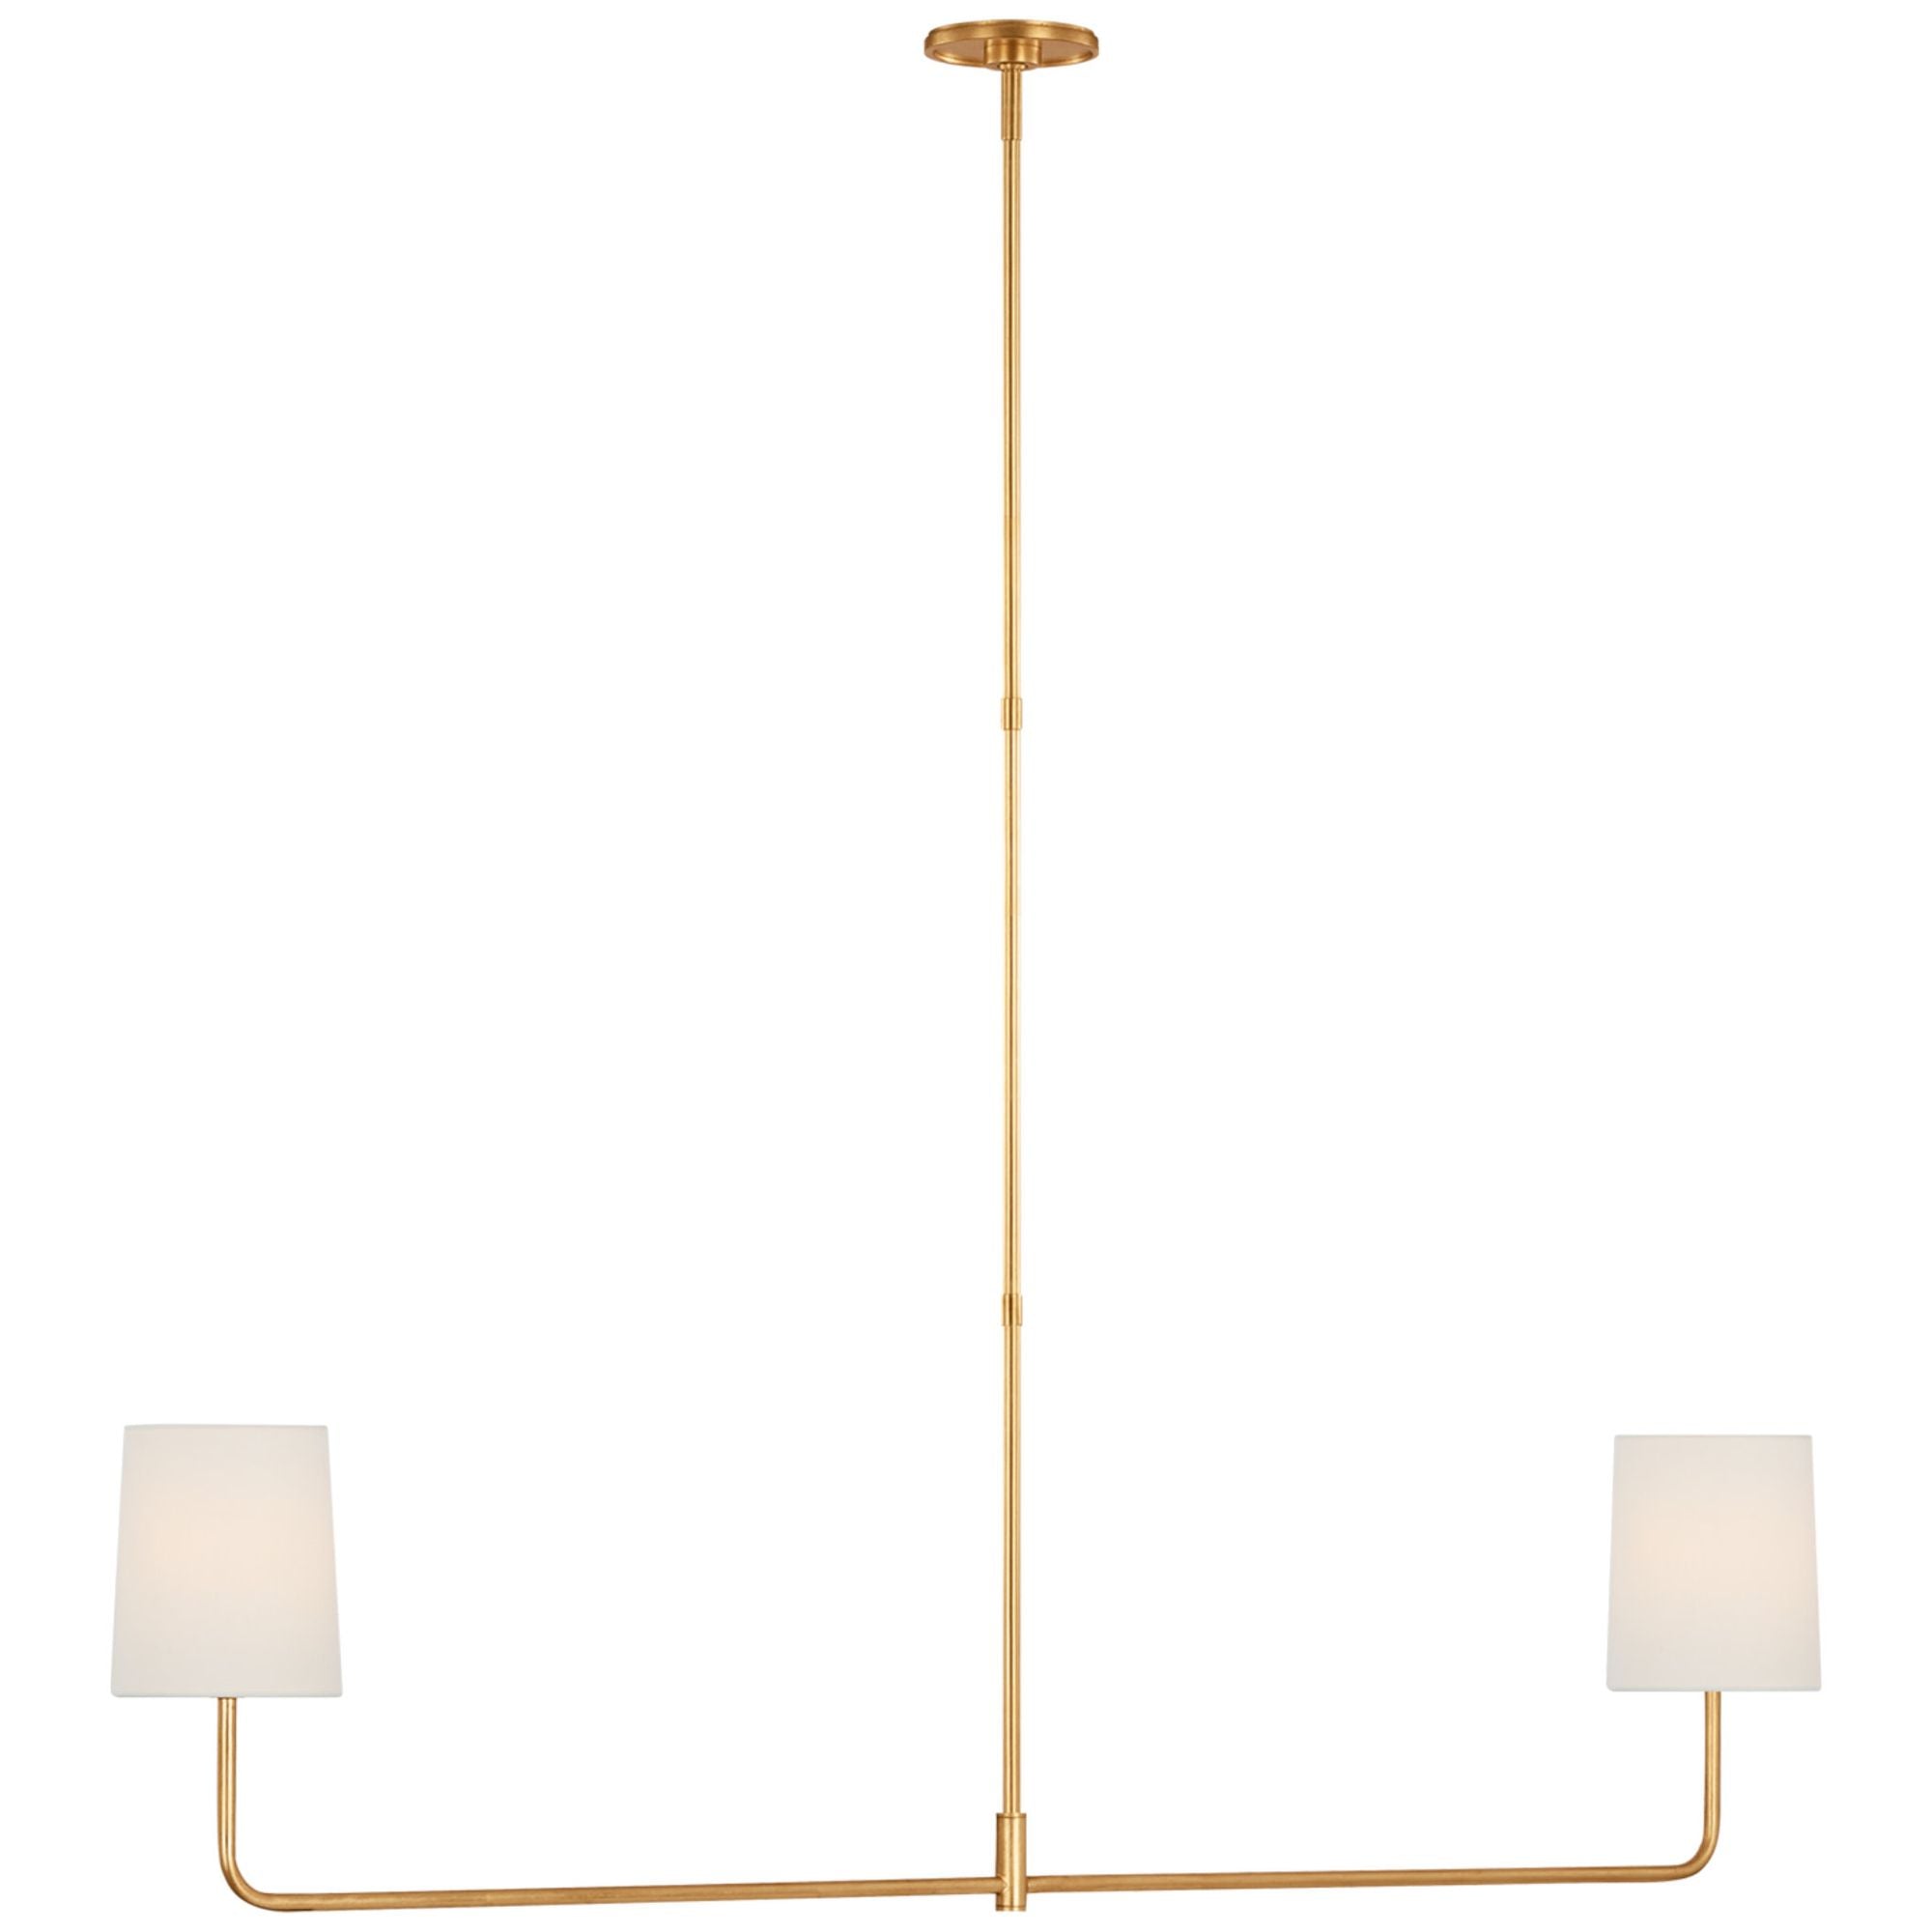 Barbara Barry Go Lightly 54" Two Light Linear Chandelier in Gild with Linen Shades